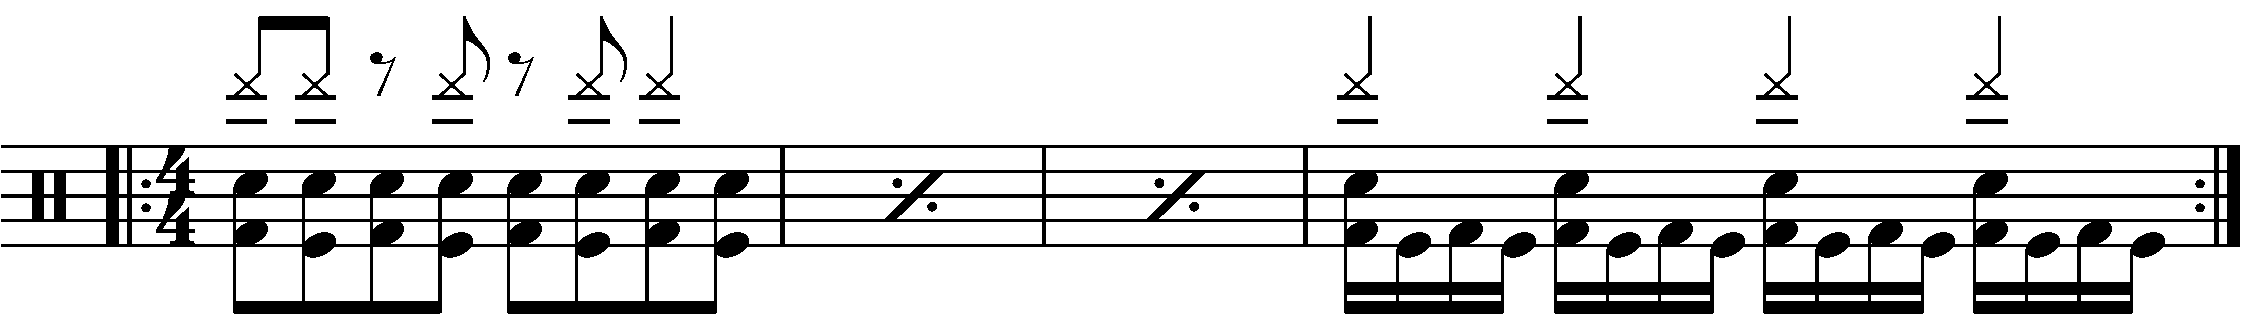 A four bar phrase with constant eighth note blast beats